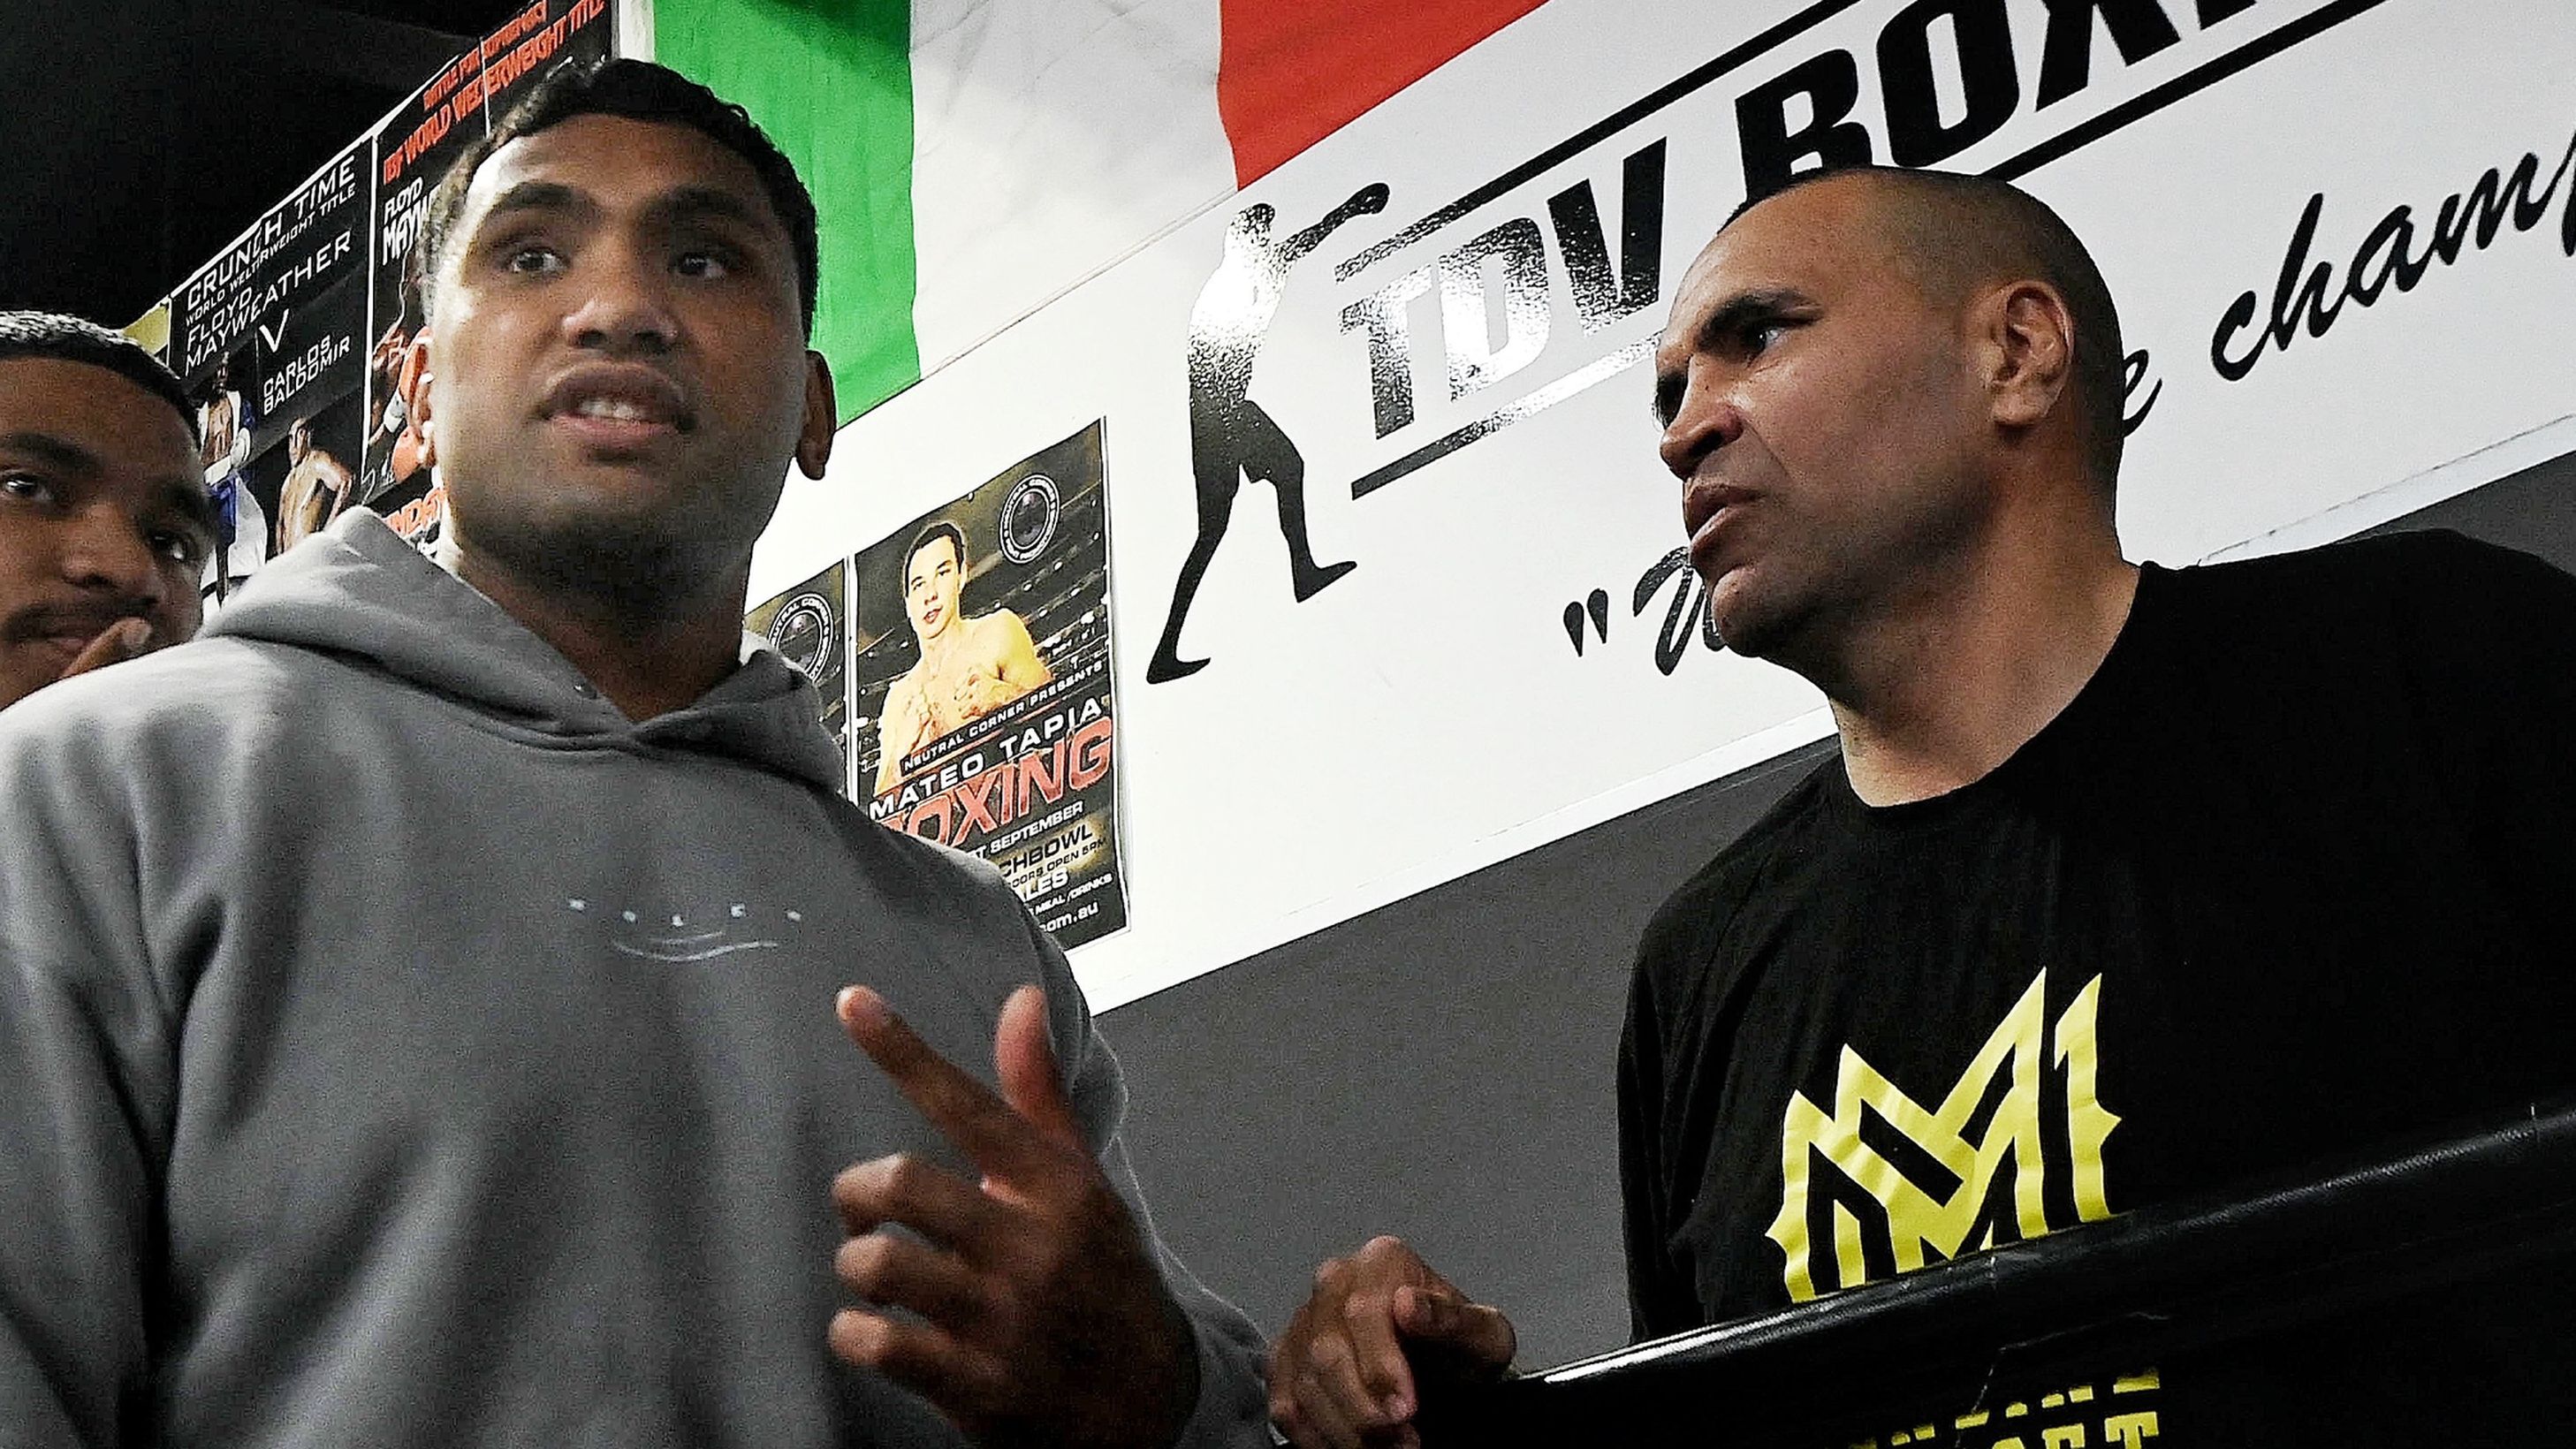 Tevita Pangai (centre) with his brother Jermaine Pangai  (left) with Anthony Mundine (right) at the Bondi Boxing Club in Waterloo.